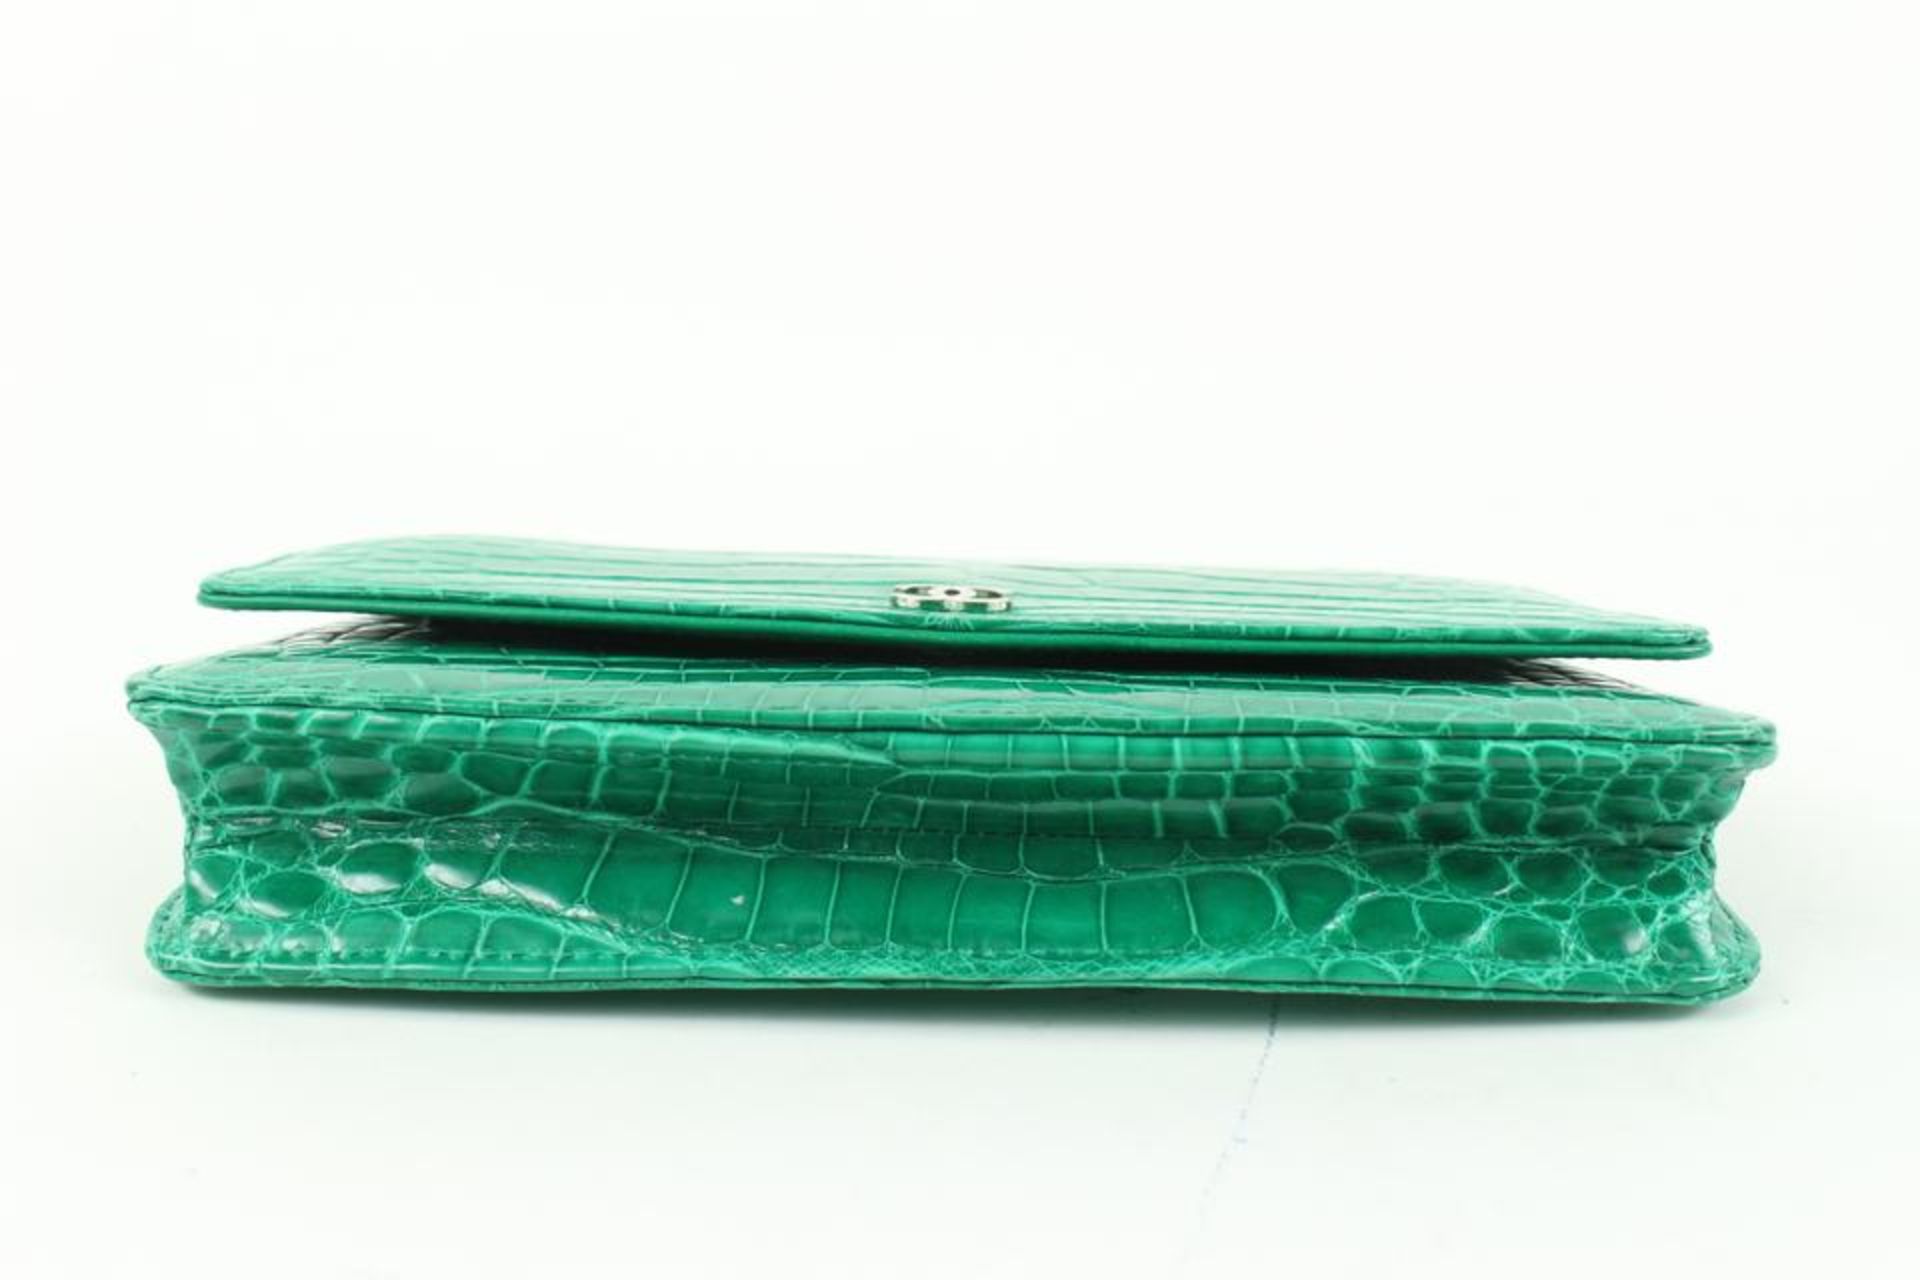 CHANEL ULTRA RARE EMERALD GREEN ALLIGATOR WALLET ON CHAIN SHW WOC - Image 4 of 11